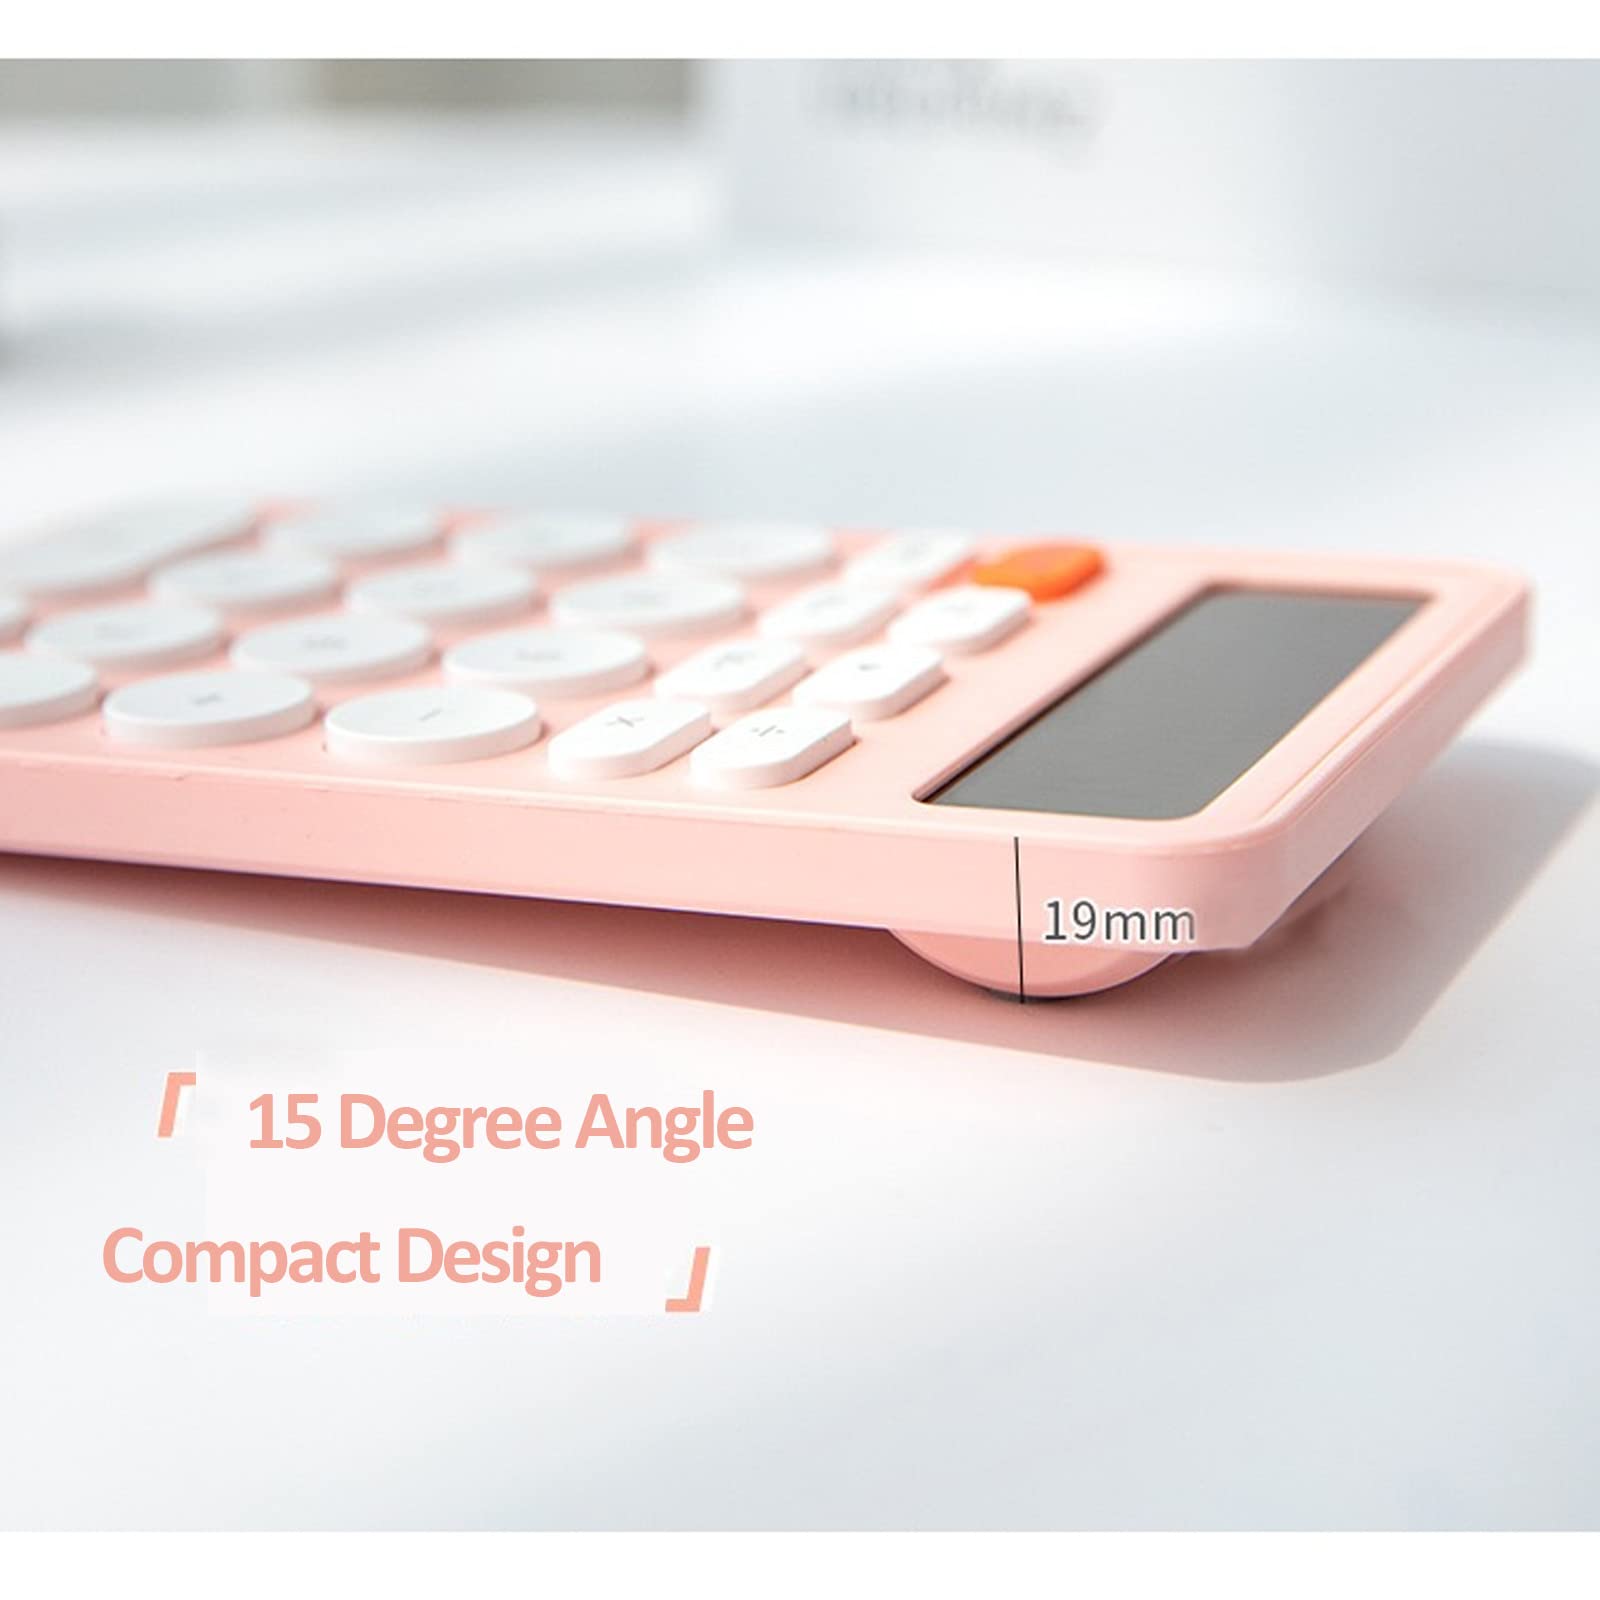 Pink Office Supplies for Women, Cute Desk Accessories, Benkaim Desk Calculator, Cute Small Calculator 12 Digit Basic Calculator with Large LCD Display and Sensitive Buttons